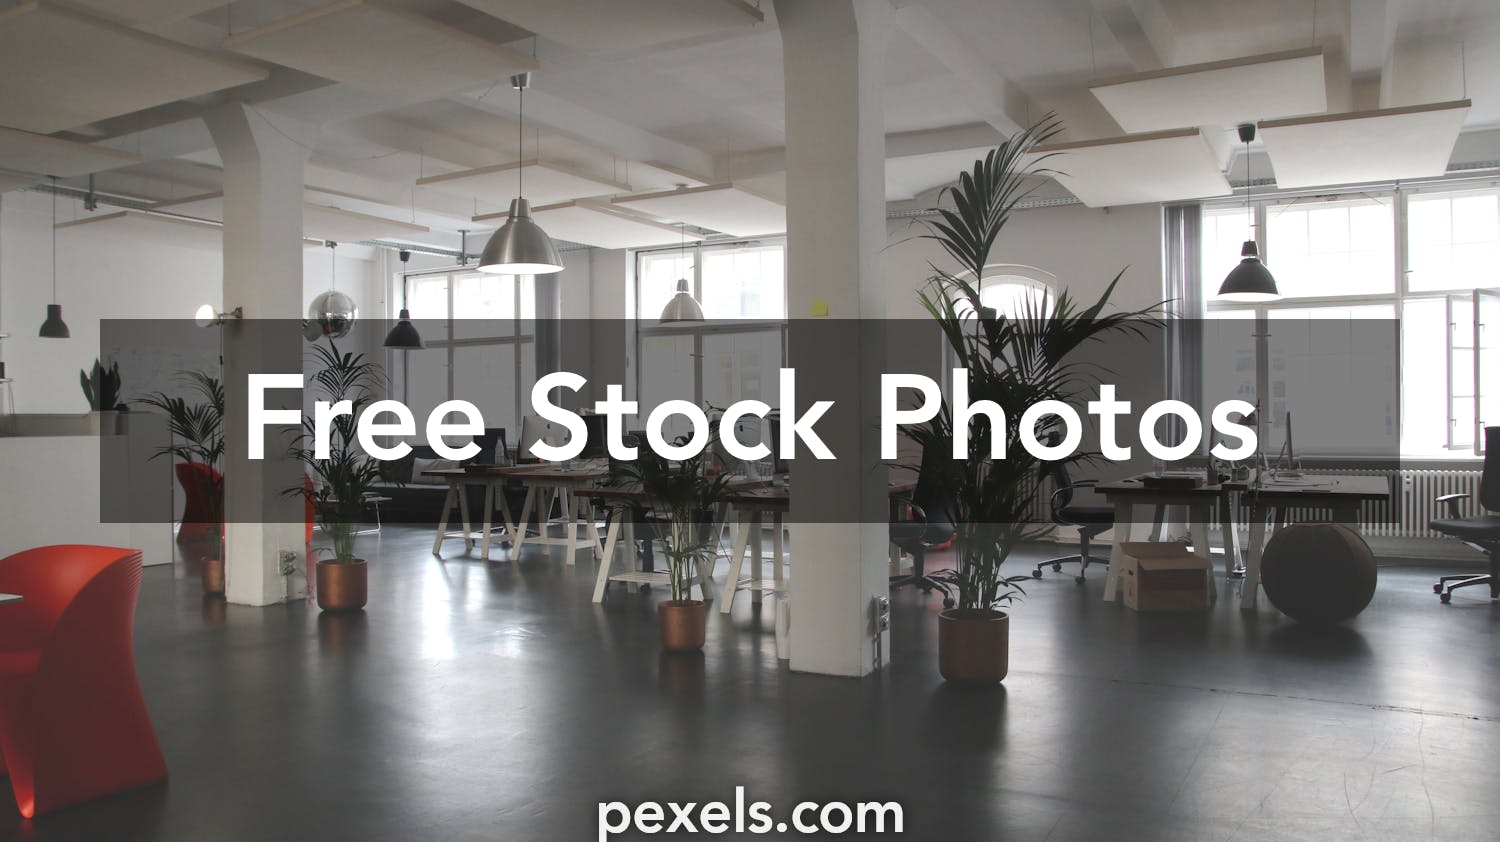 Office Images Pexels Free Stock Photos Images, Photos, Reviews